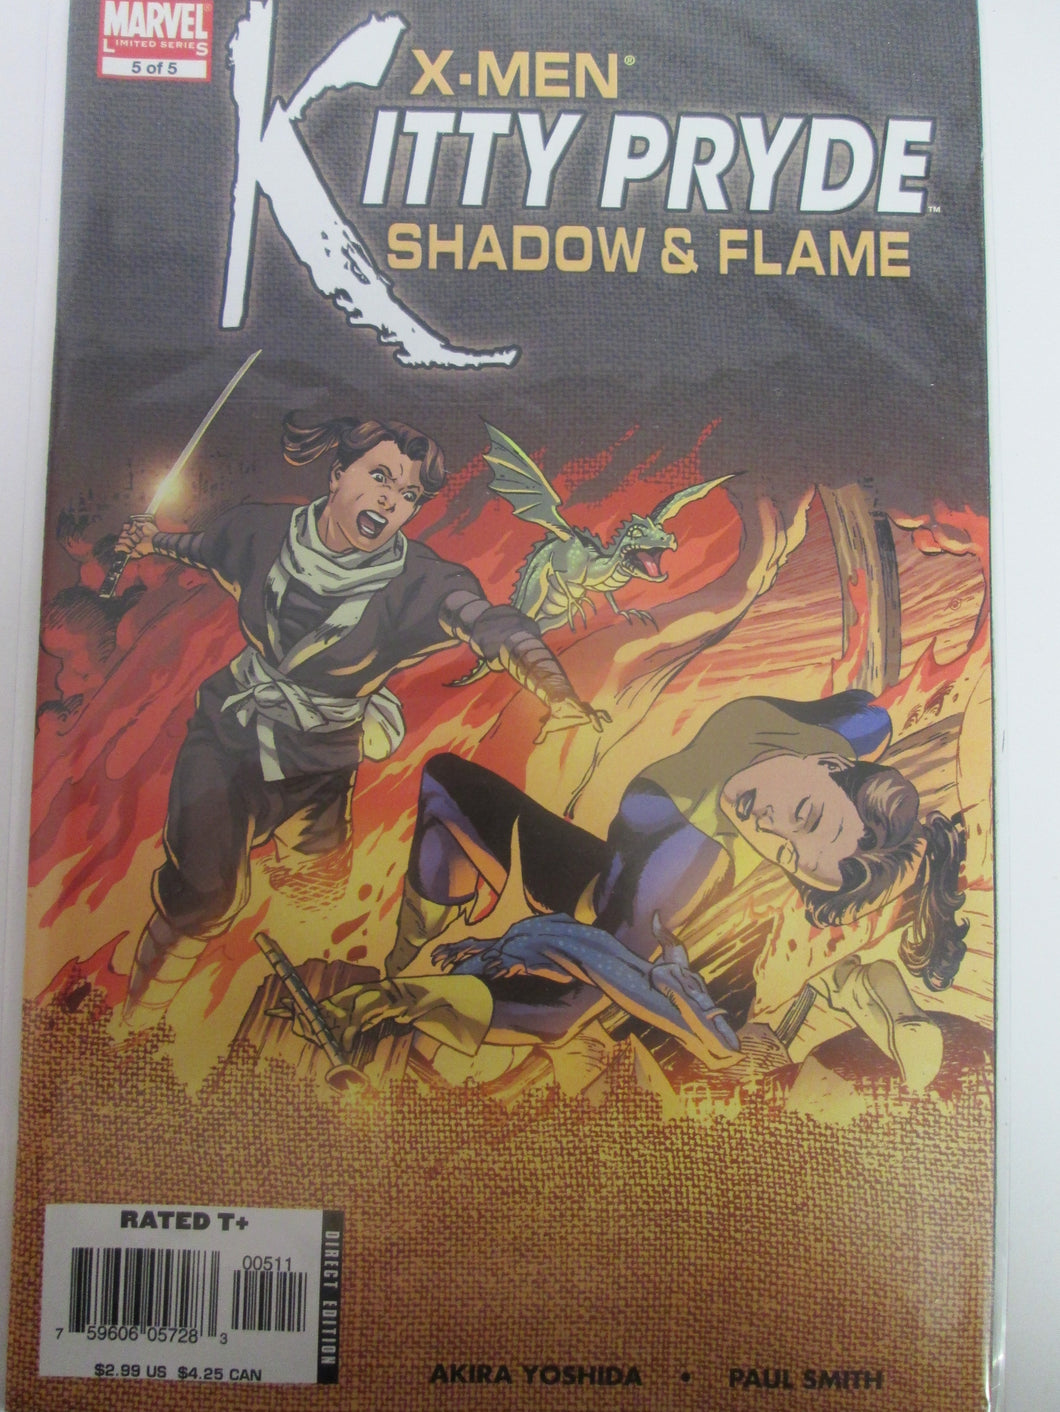 X-Men Kitty Pryde Shadow & Flame # 5 (Marvel)